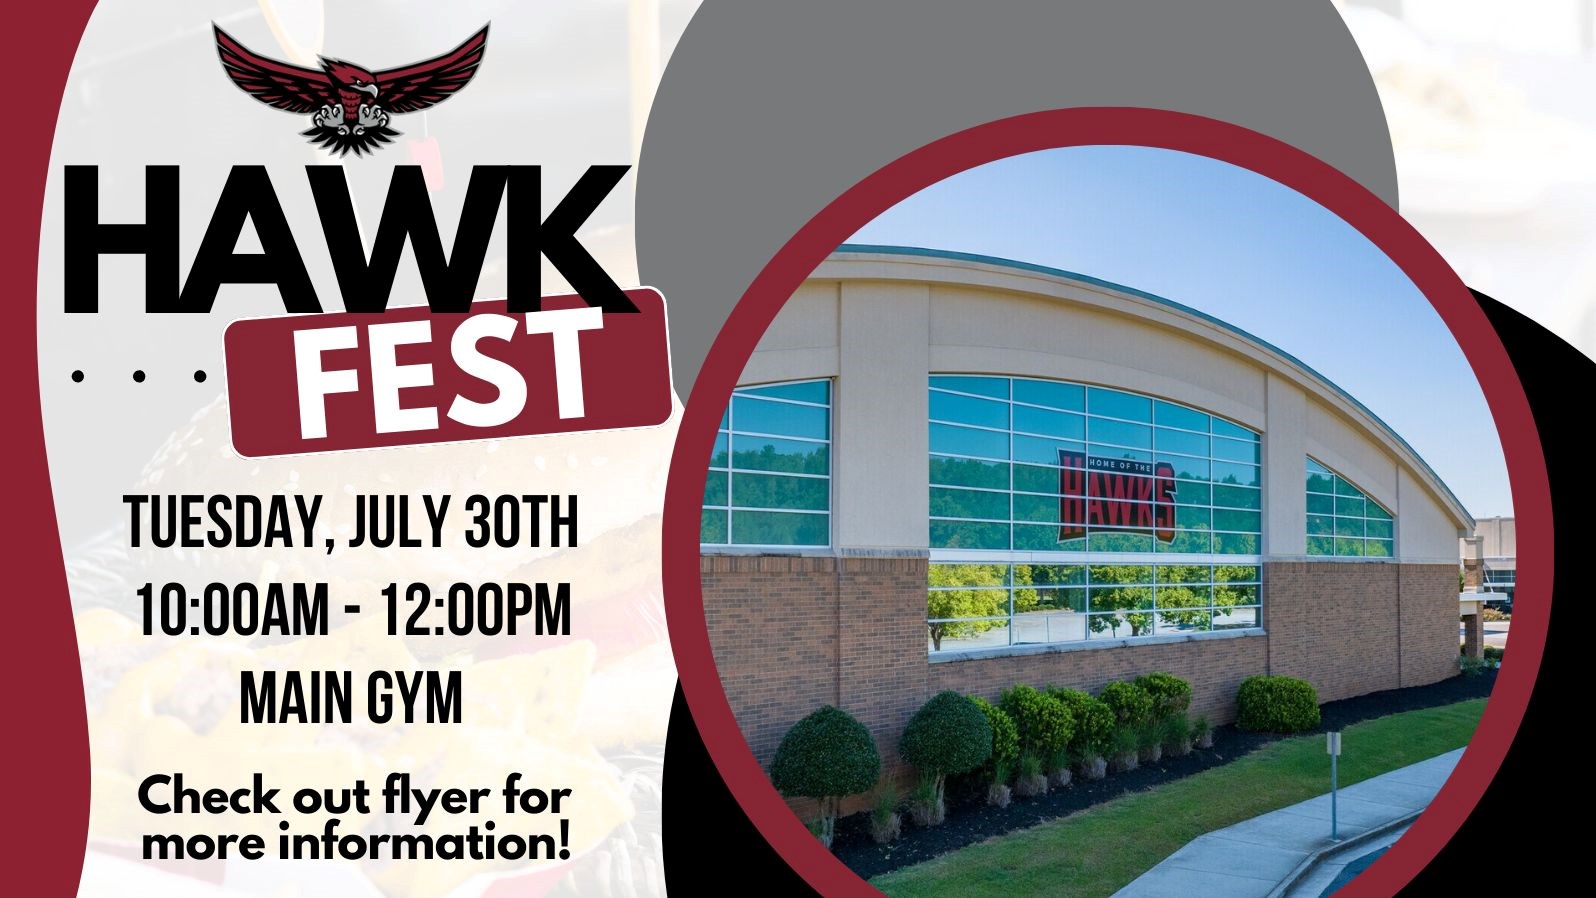 hawk fest tuesday july 30th 10am to 12pm in the main gym